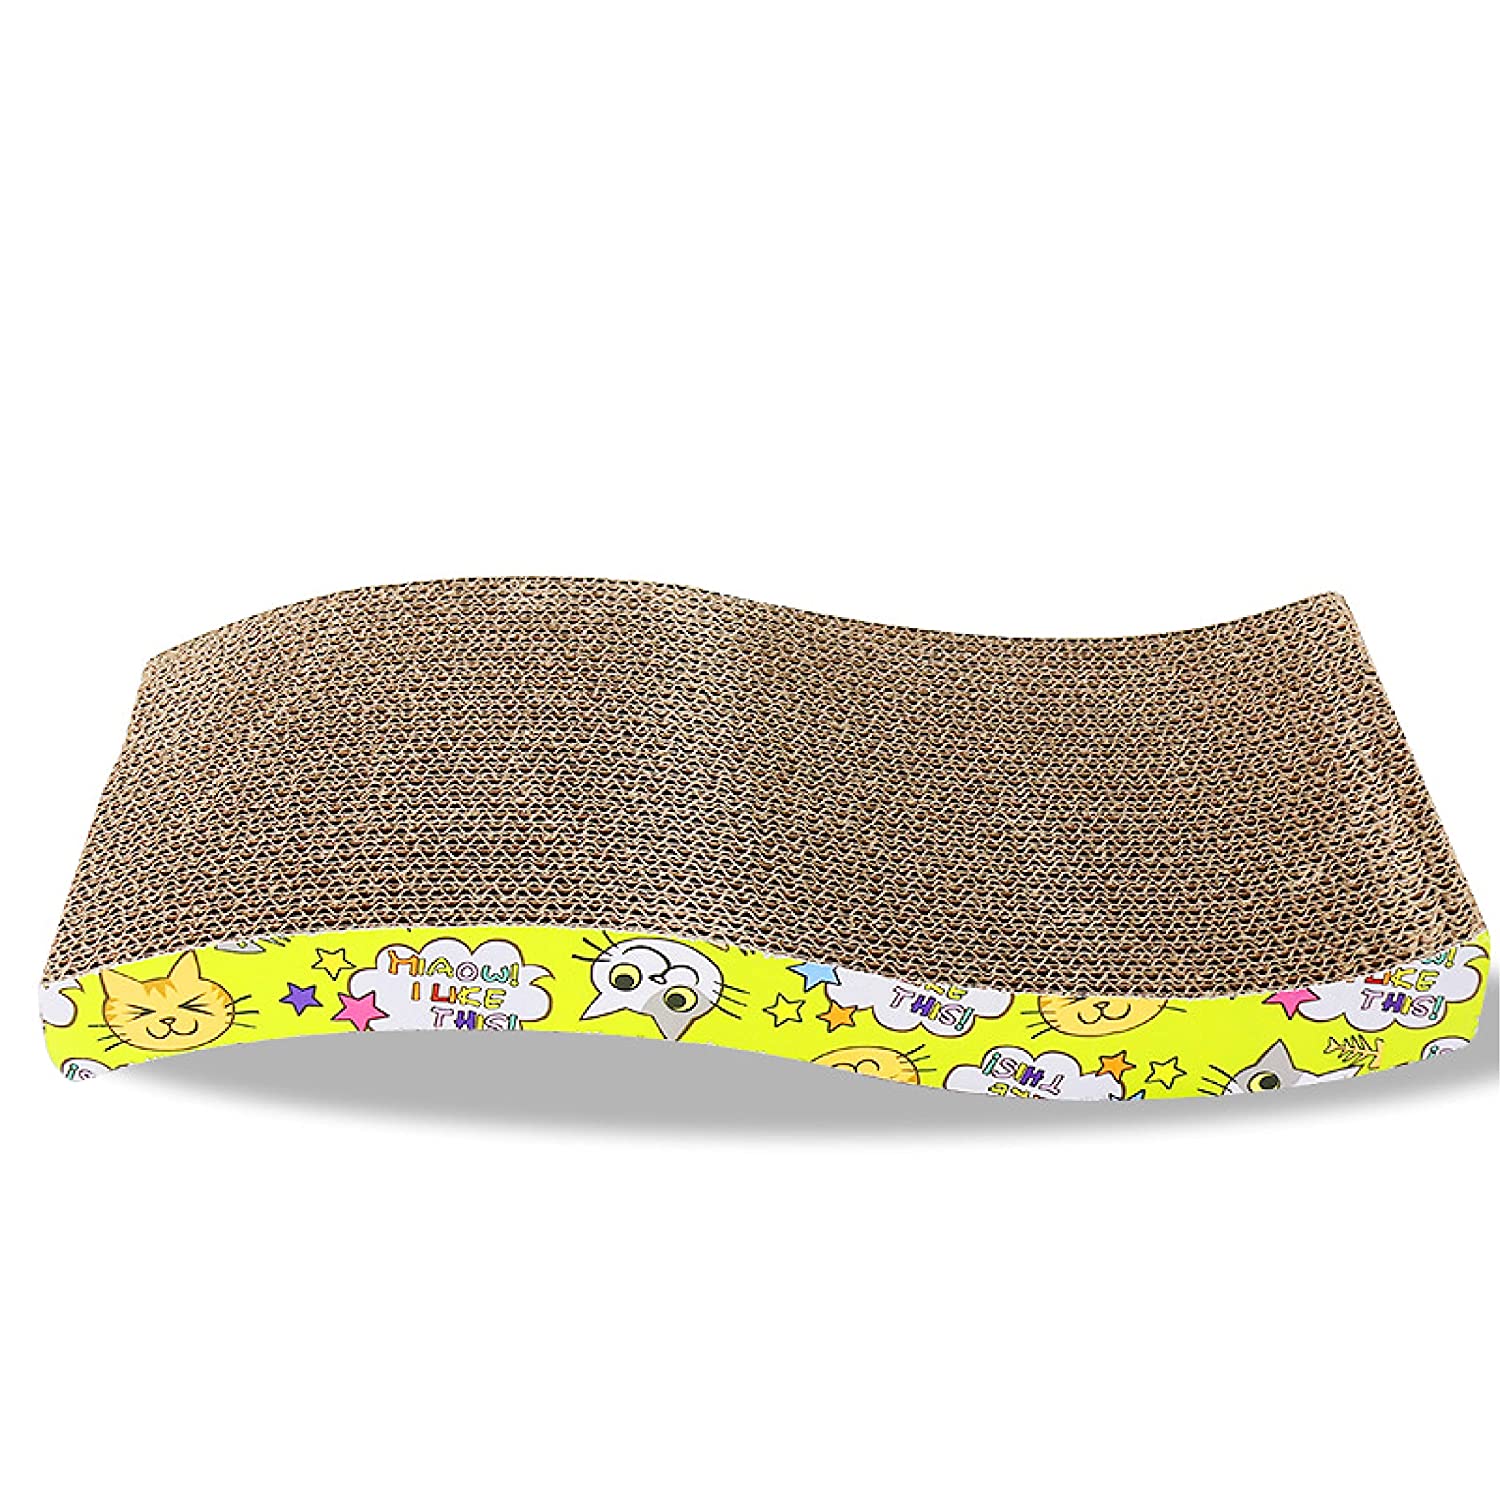 Goofy Tails Recycled Paper S-Shaped Cat Scratching Pad